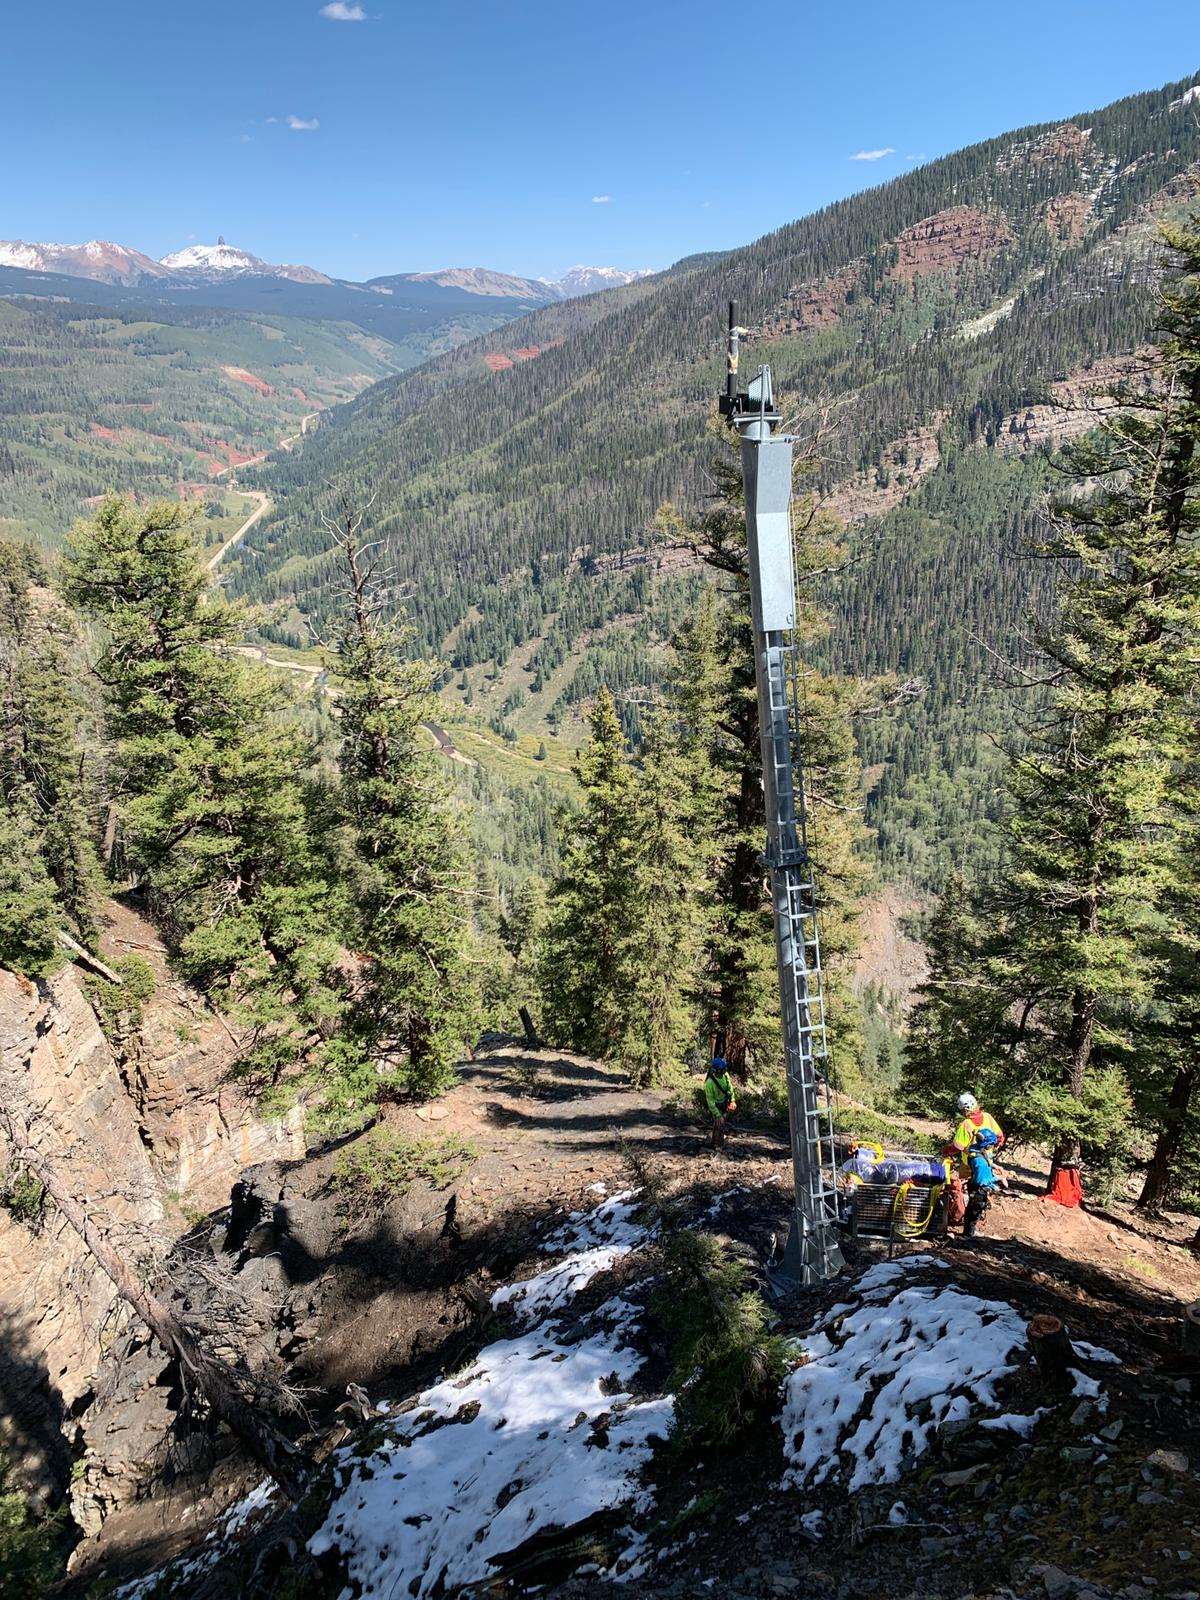 In slightly snowy mountains, a crew is installing one of five towers above CO 145 in southwest Colorado